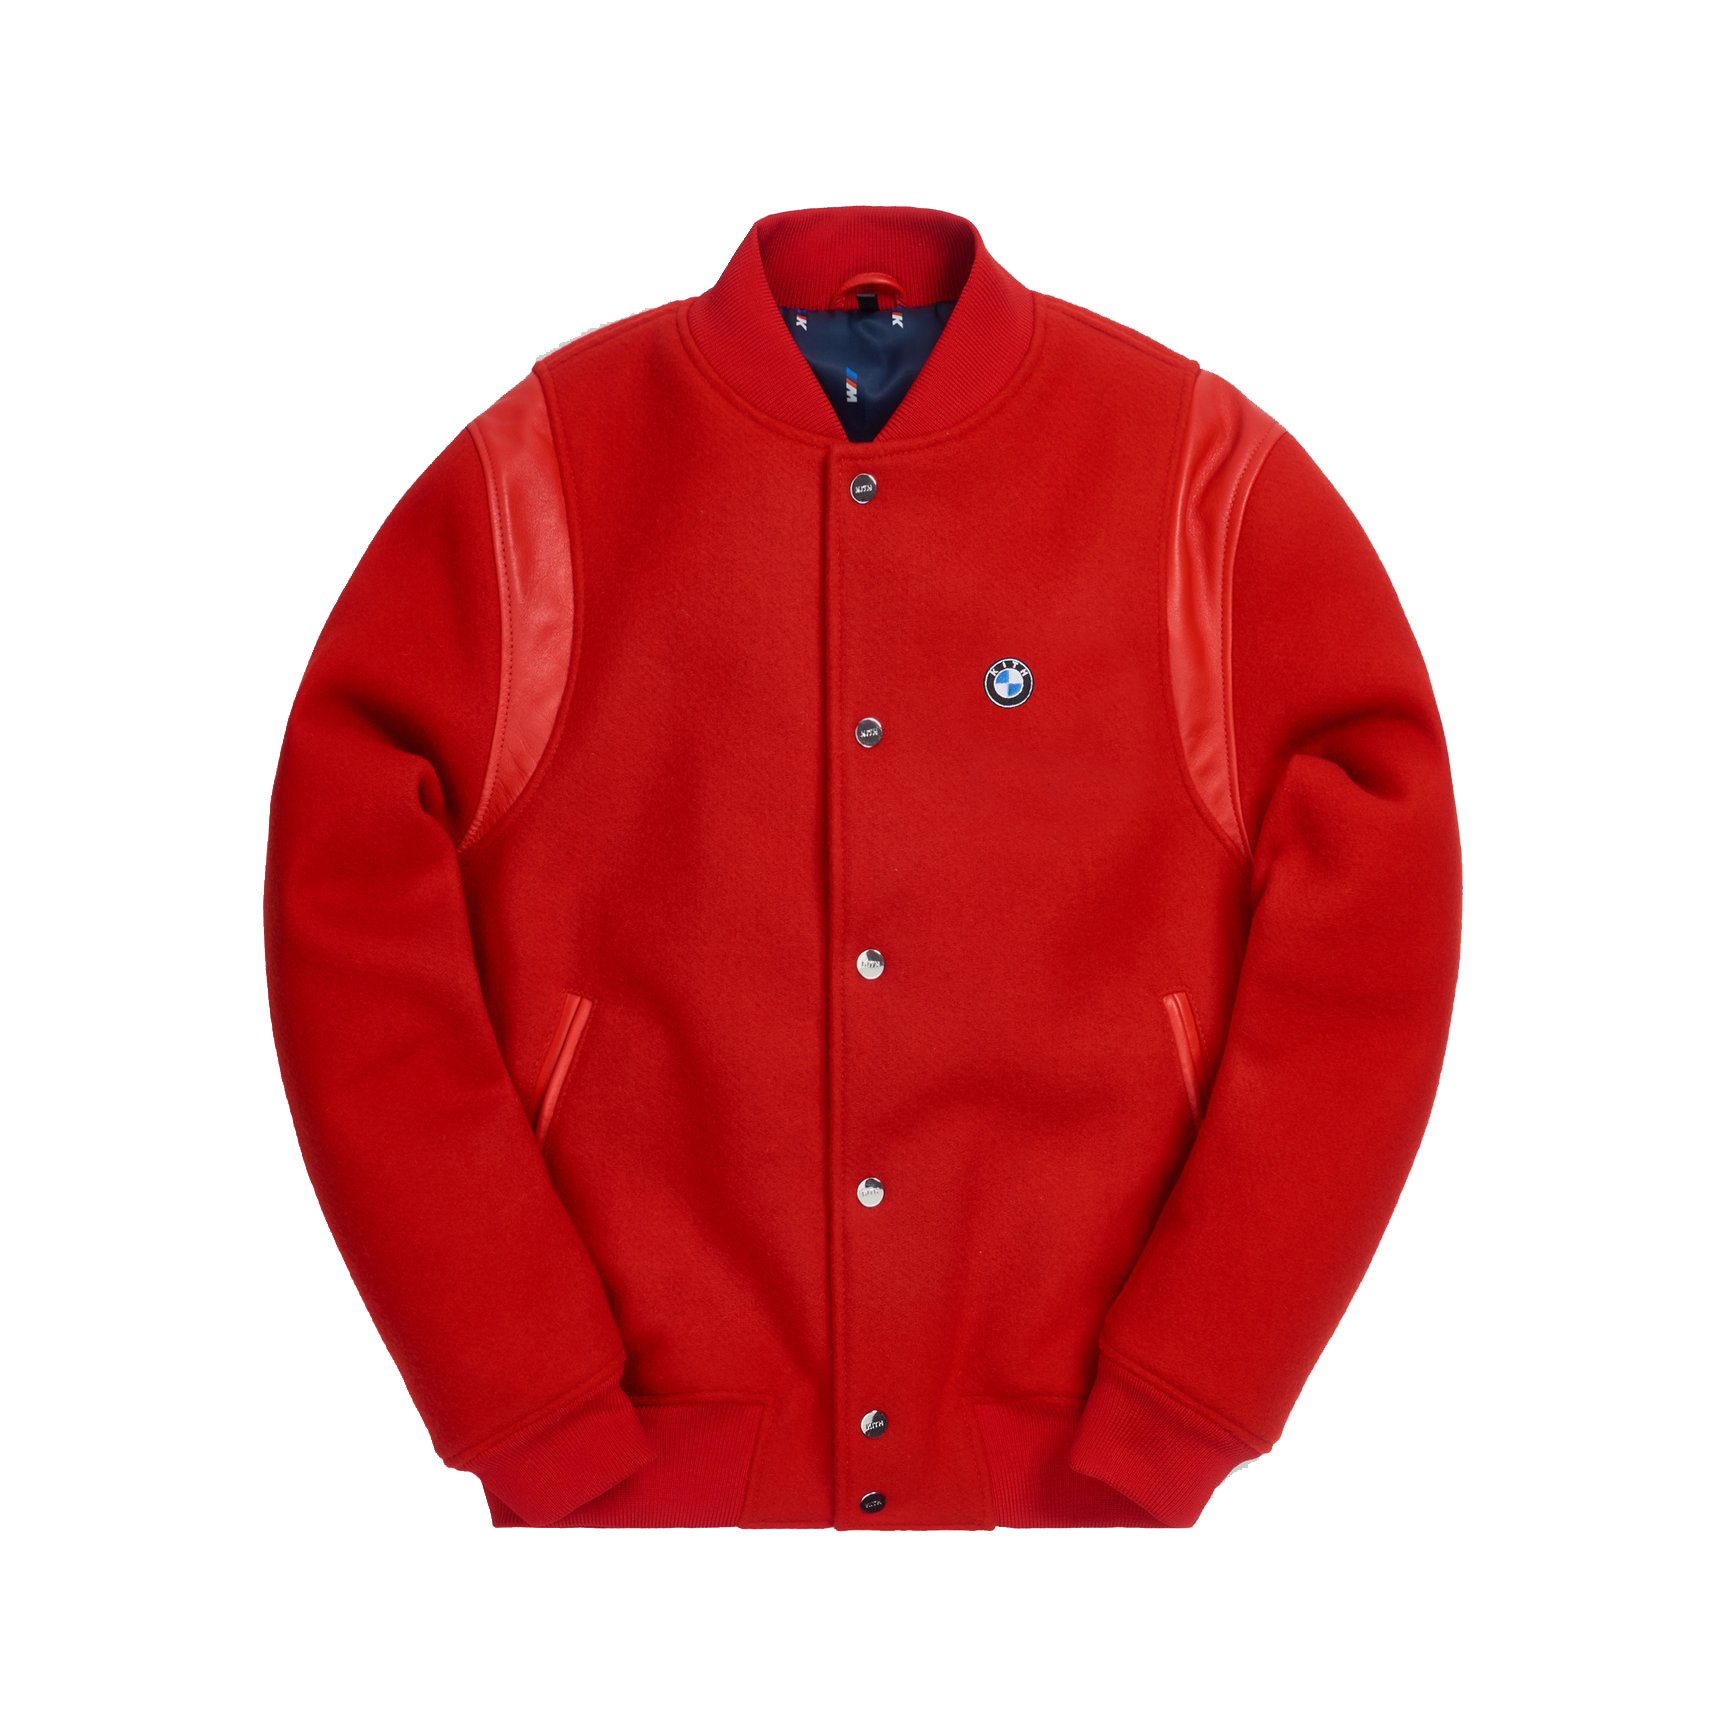 Kith x BMW Wool Bomber Red - FW20 - US